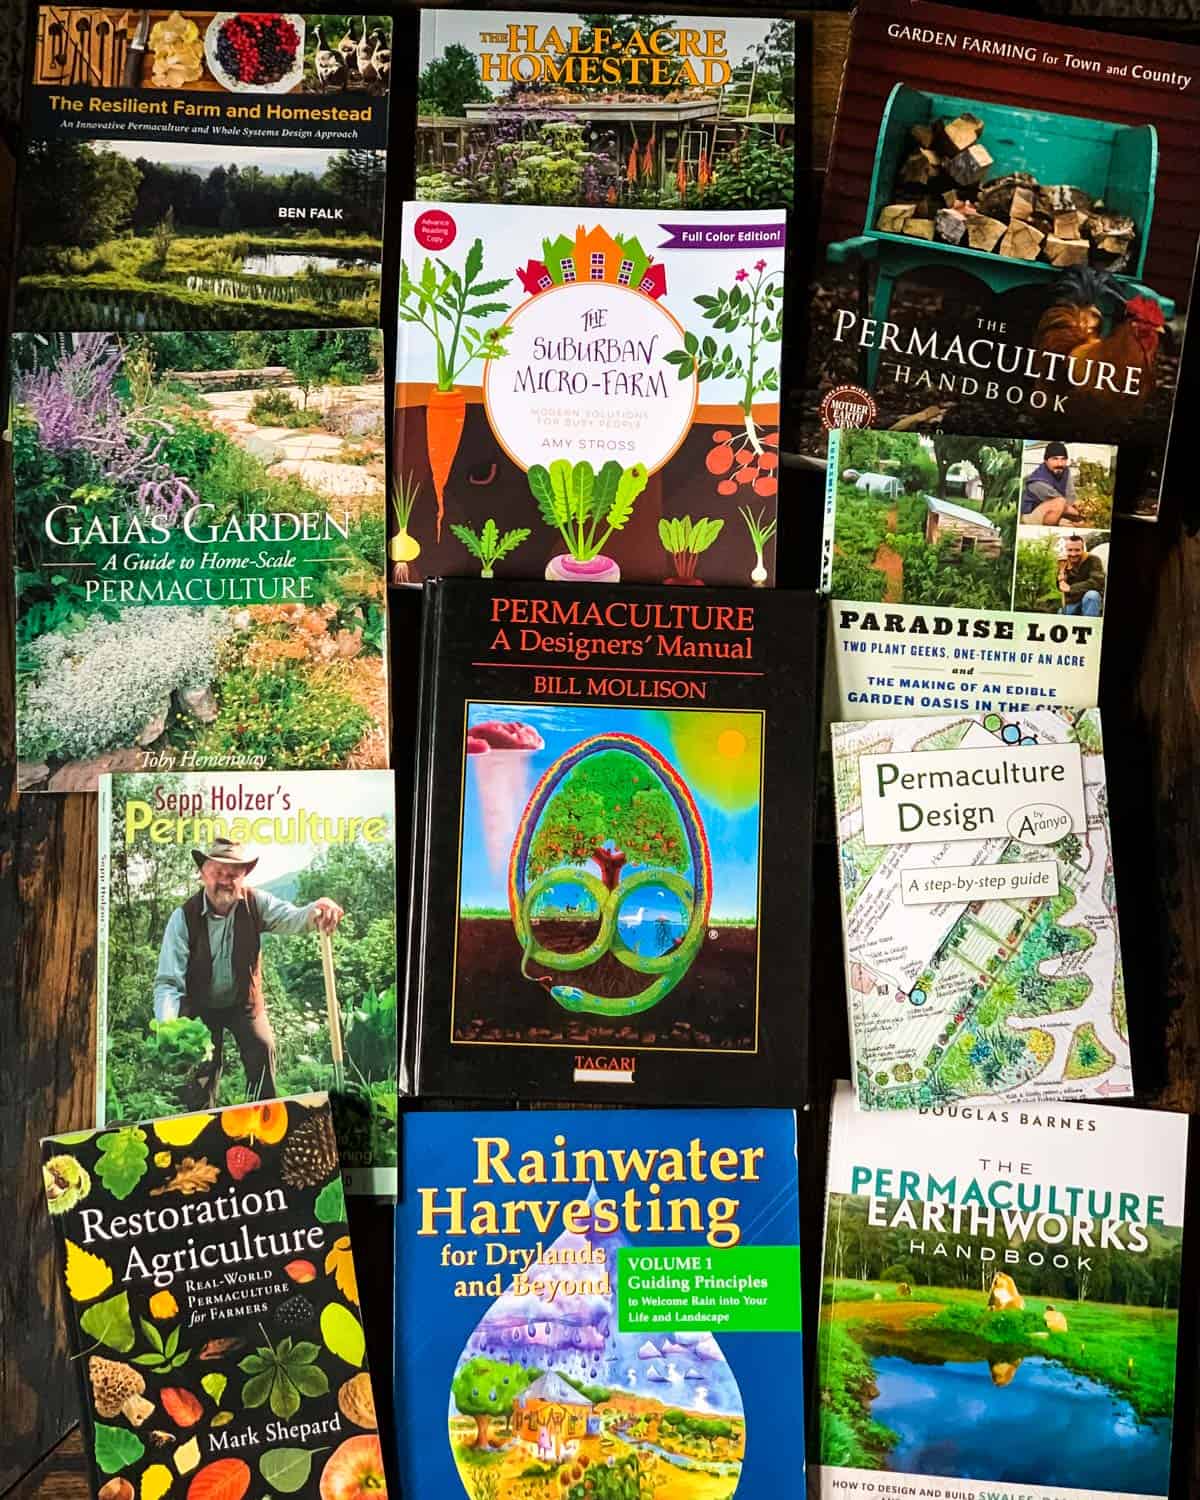 A photo of permaculture books laying face up on a wooden table so the covers can be seen. 